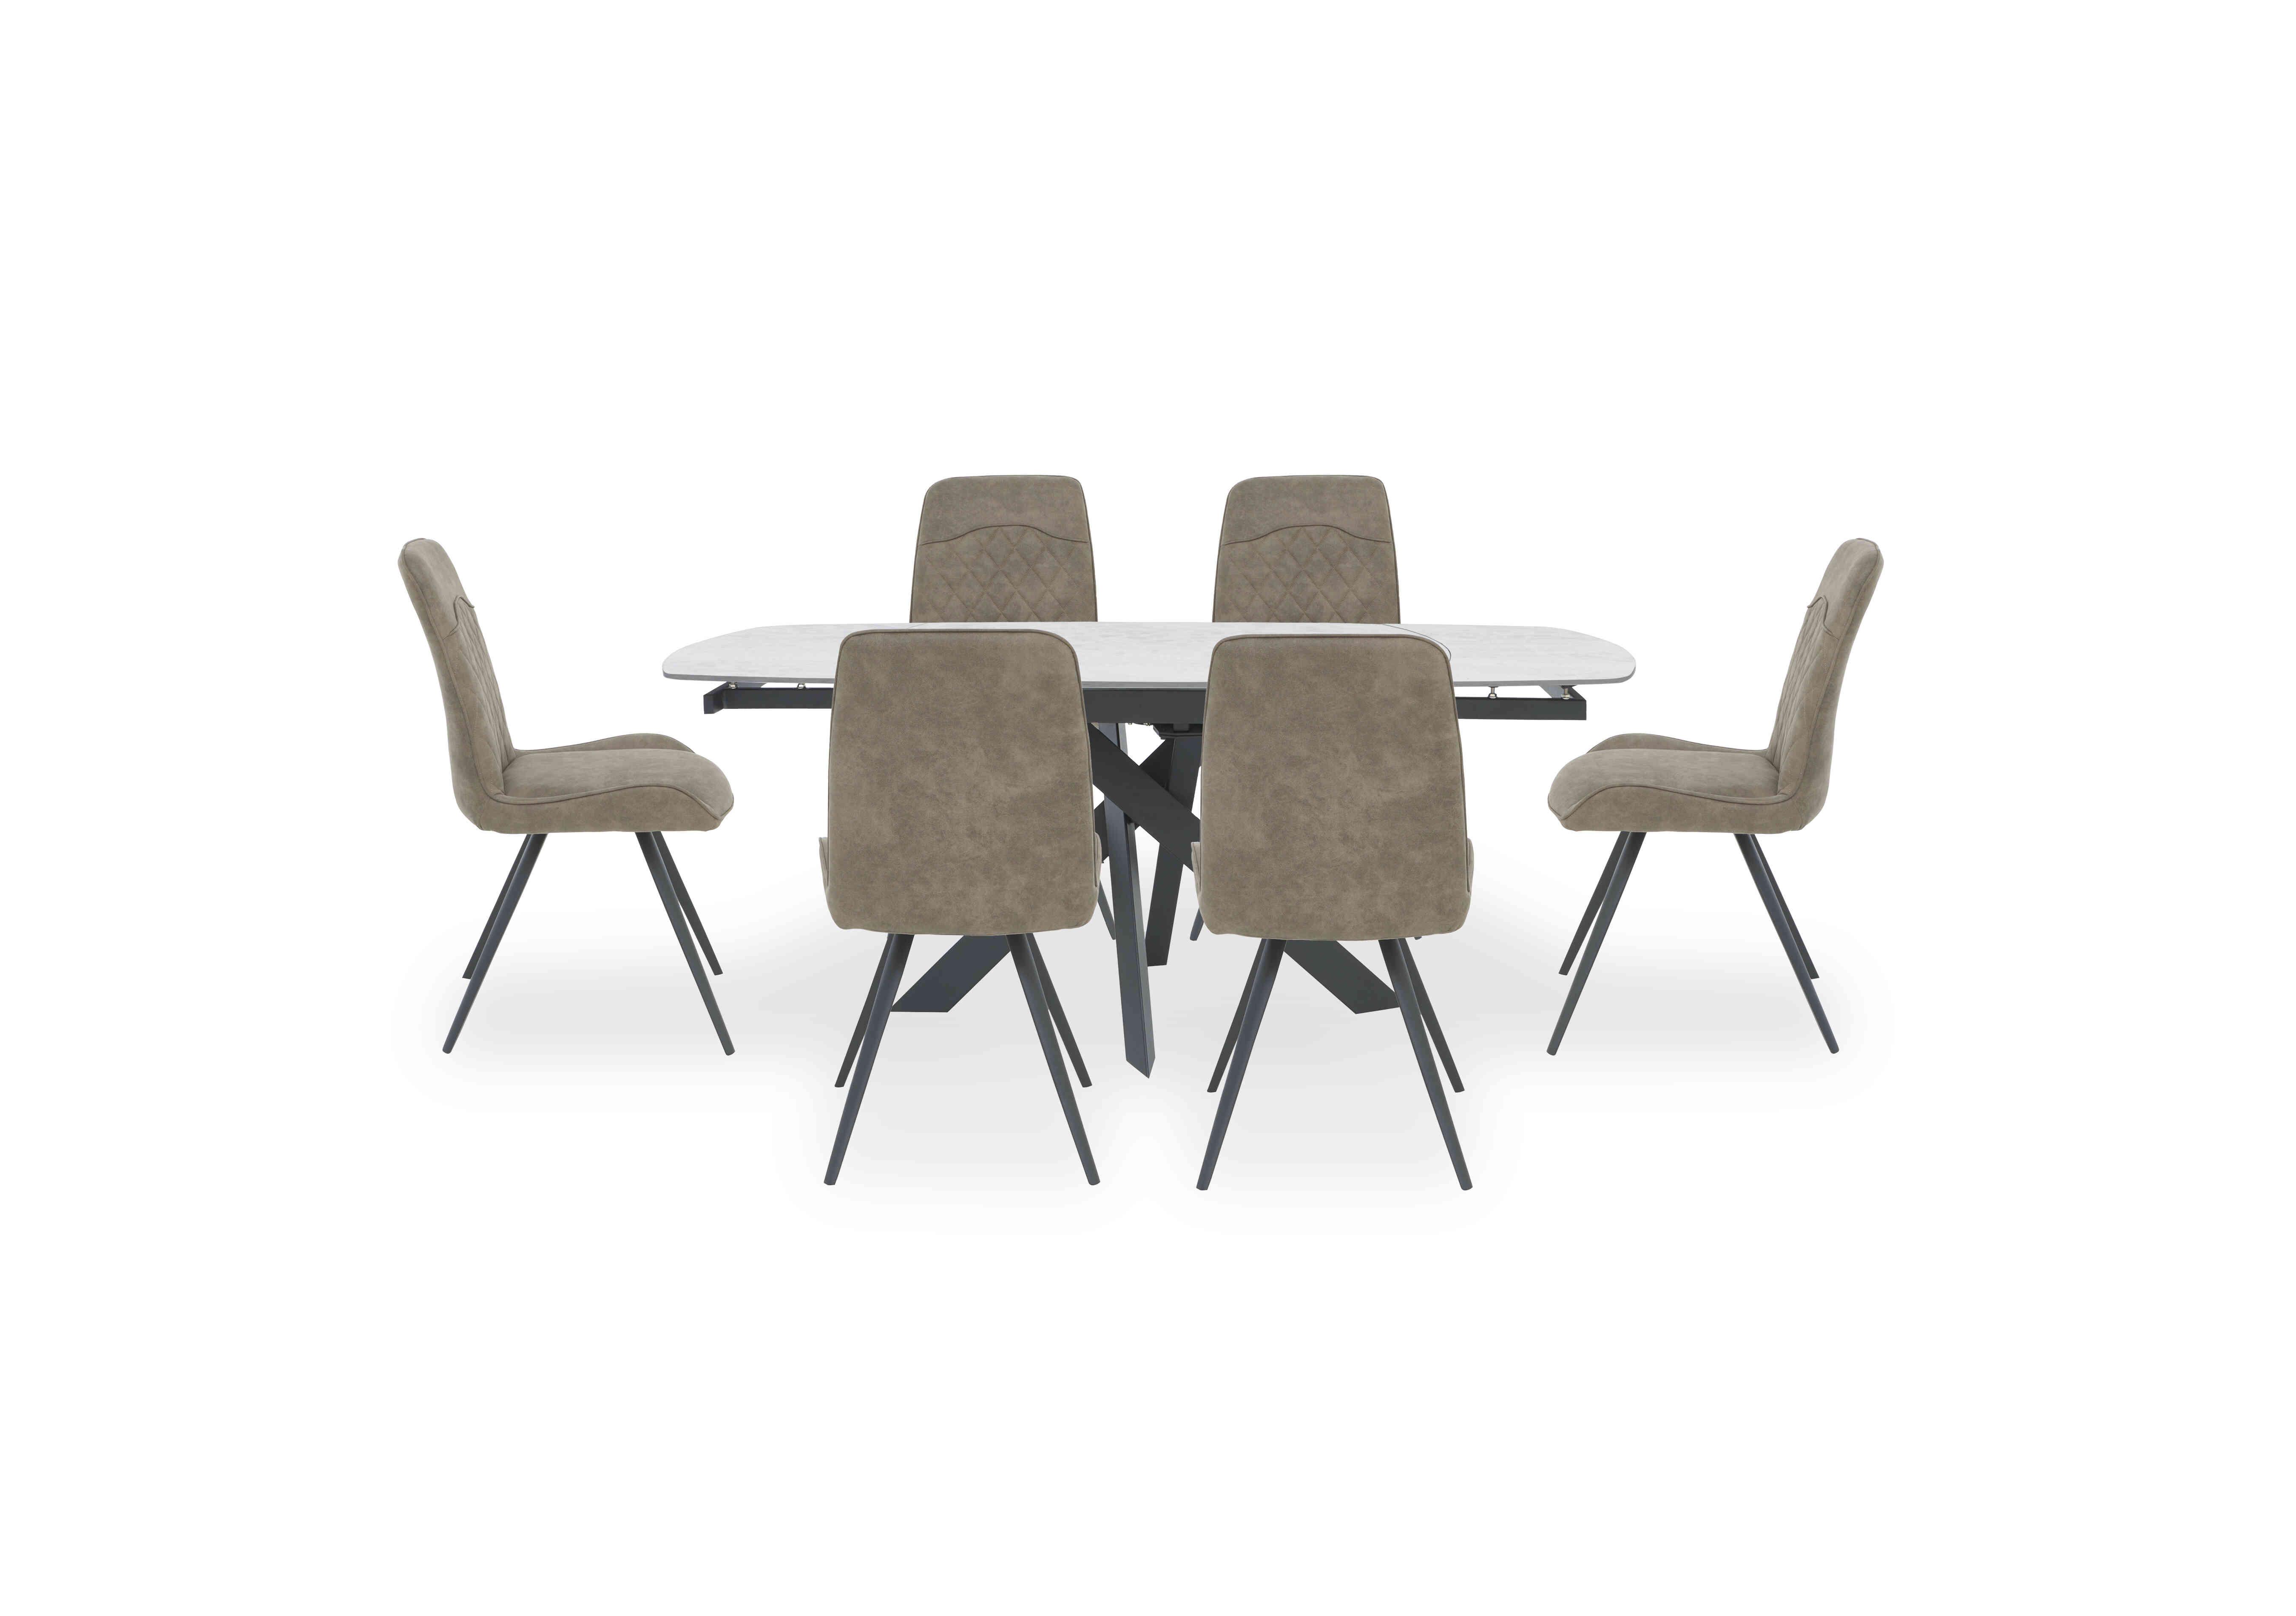 Warrior Crystal White Swivel Extending Dining Table with 6 Standard Dining Chairs in White/Taupe on Furniture Village